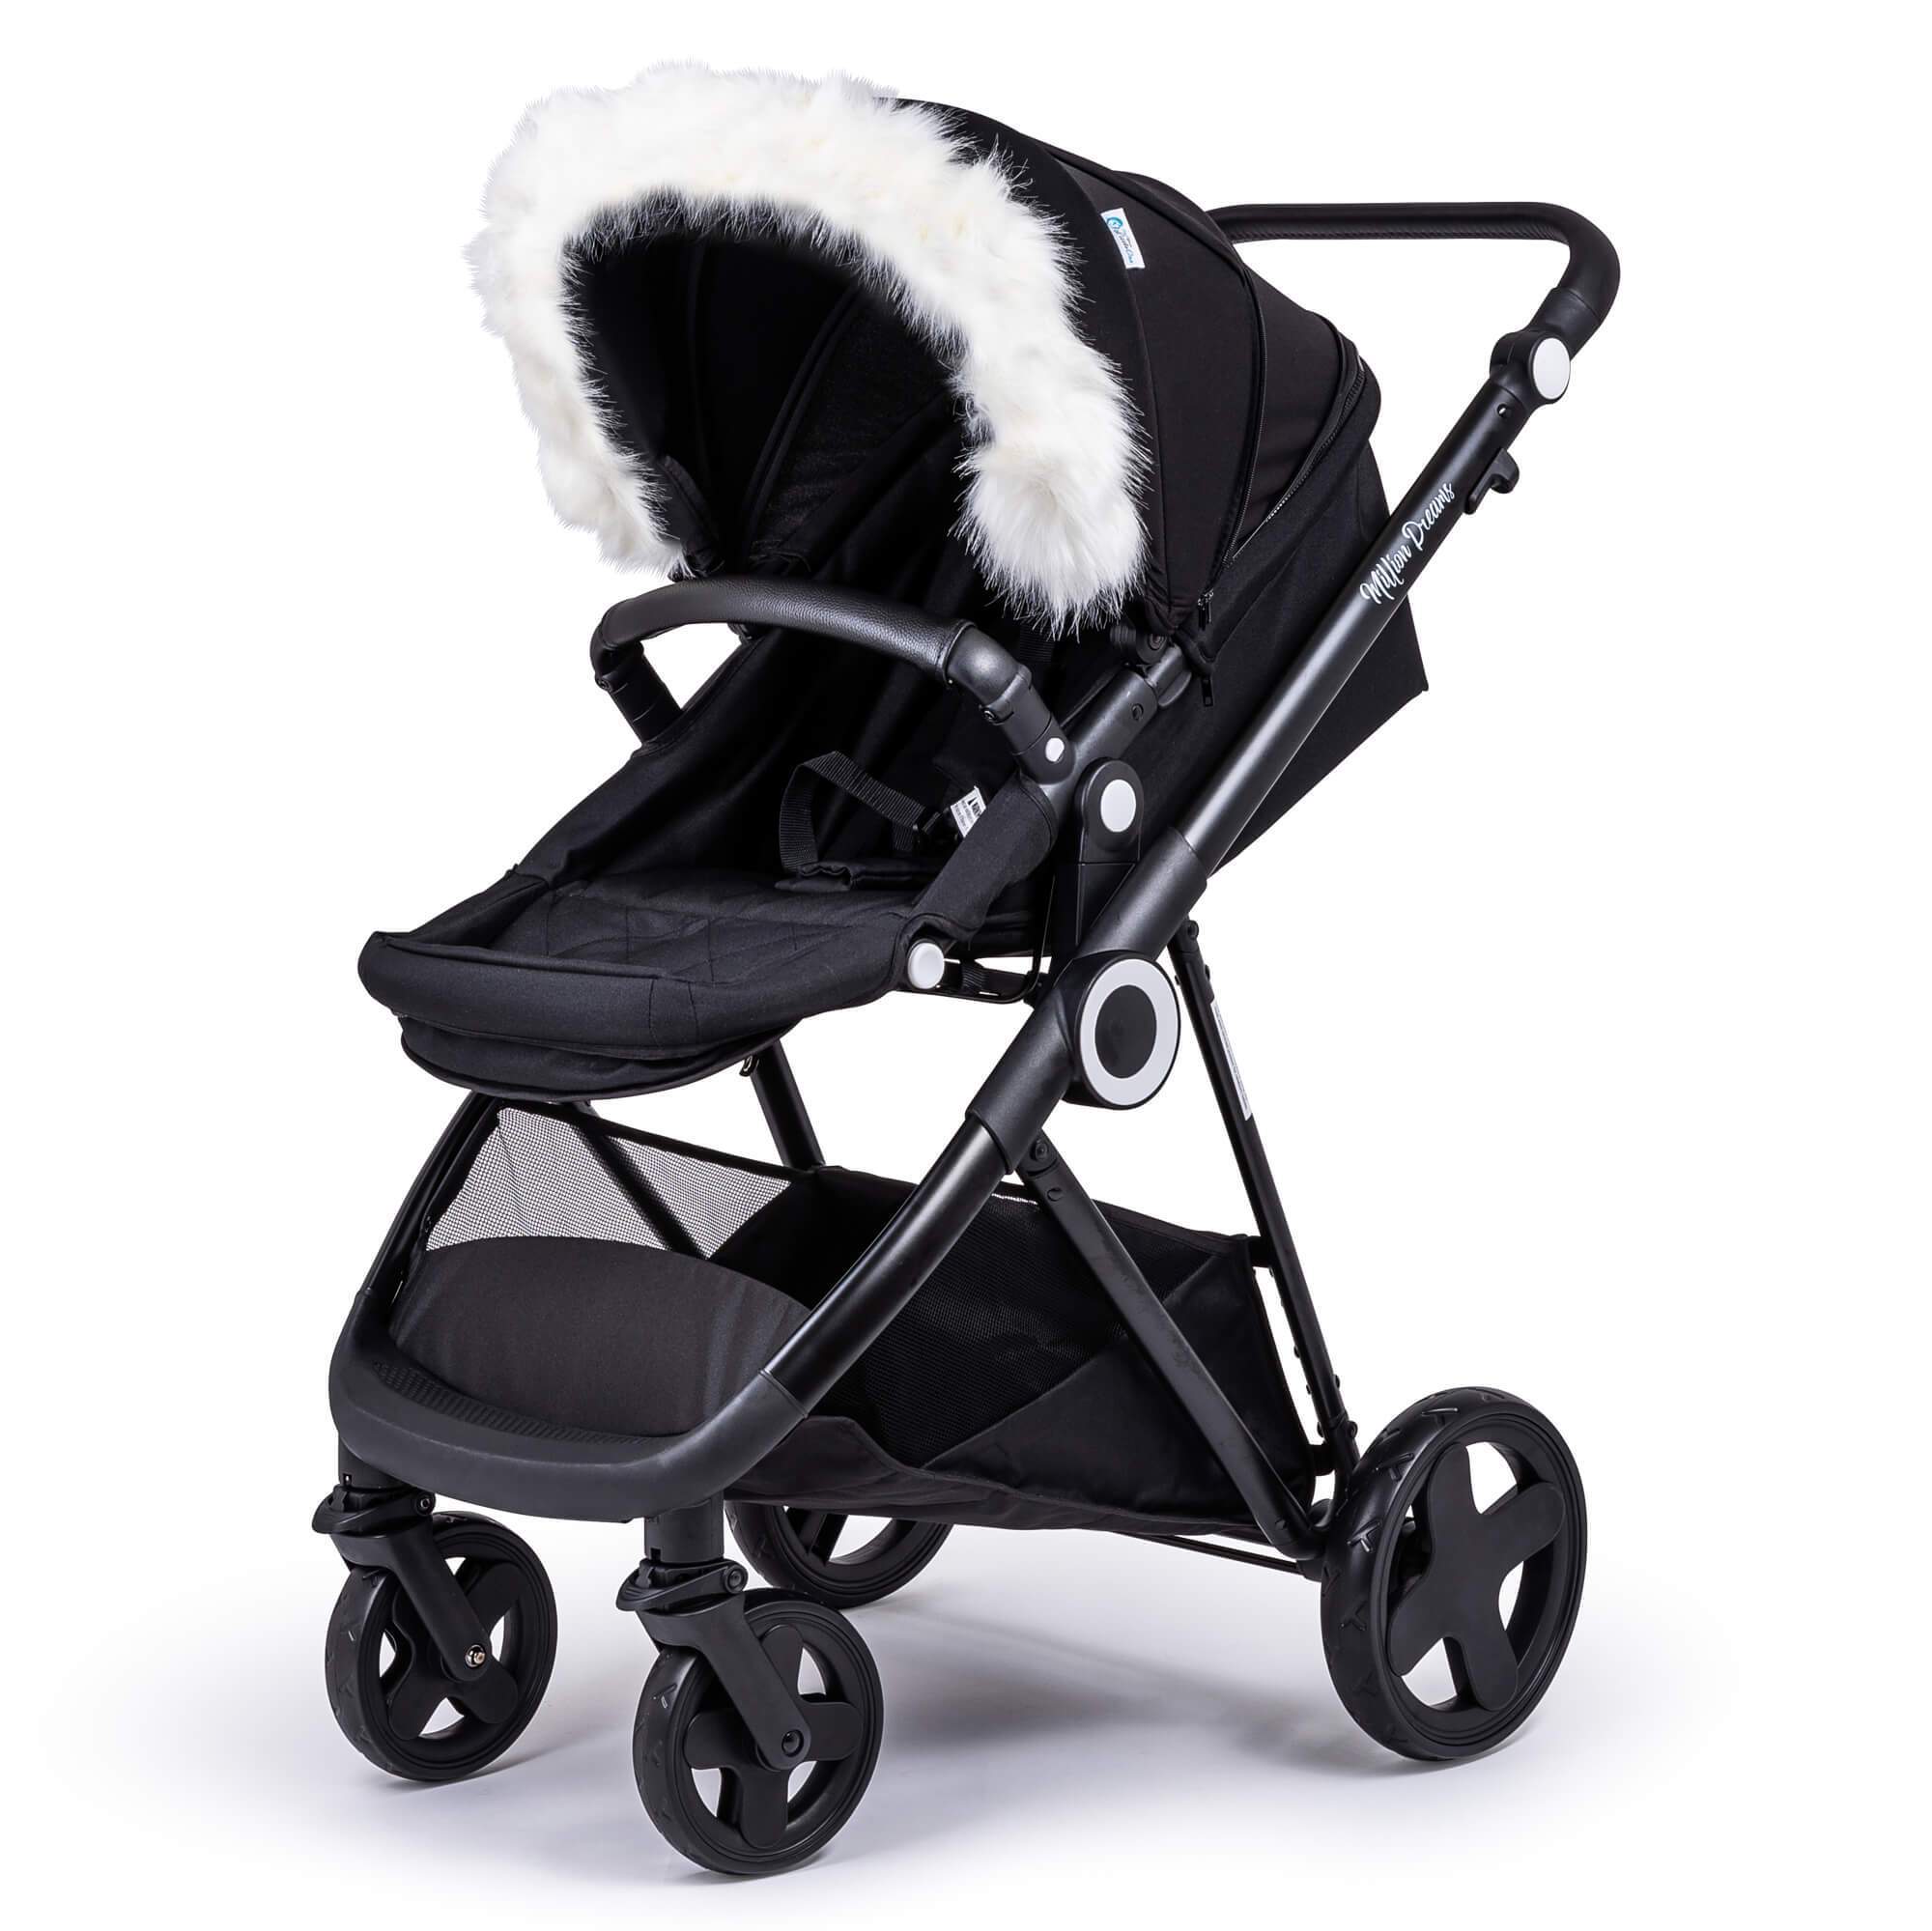 Pram Fur Hood Trim Attachment for Pushchair Compatible with Egg - White / Fits All Models | For Your Little One